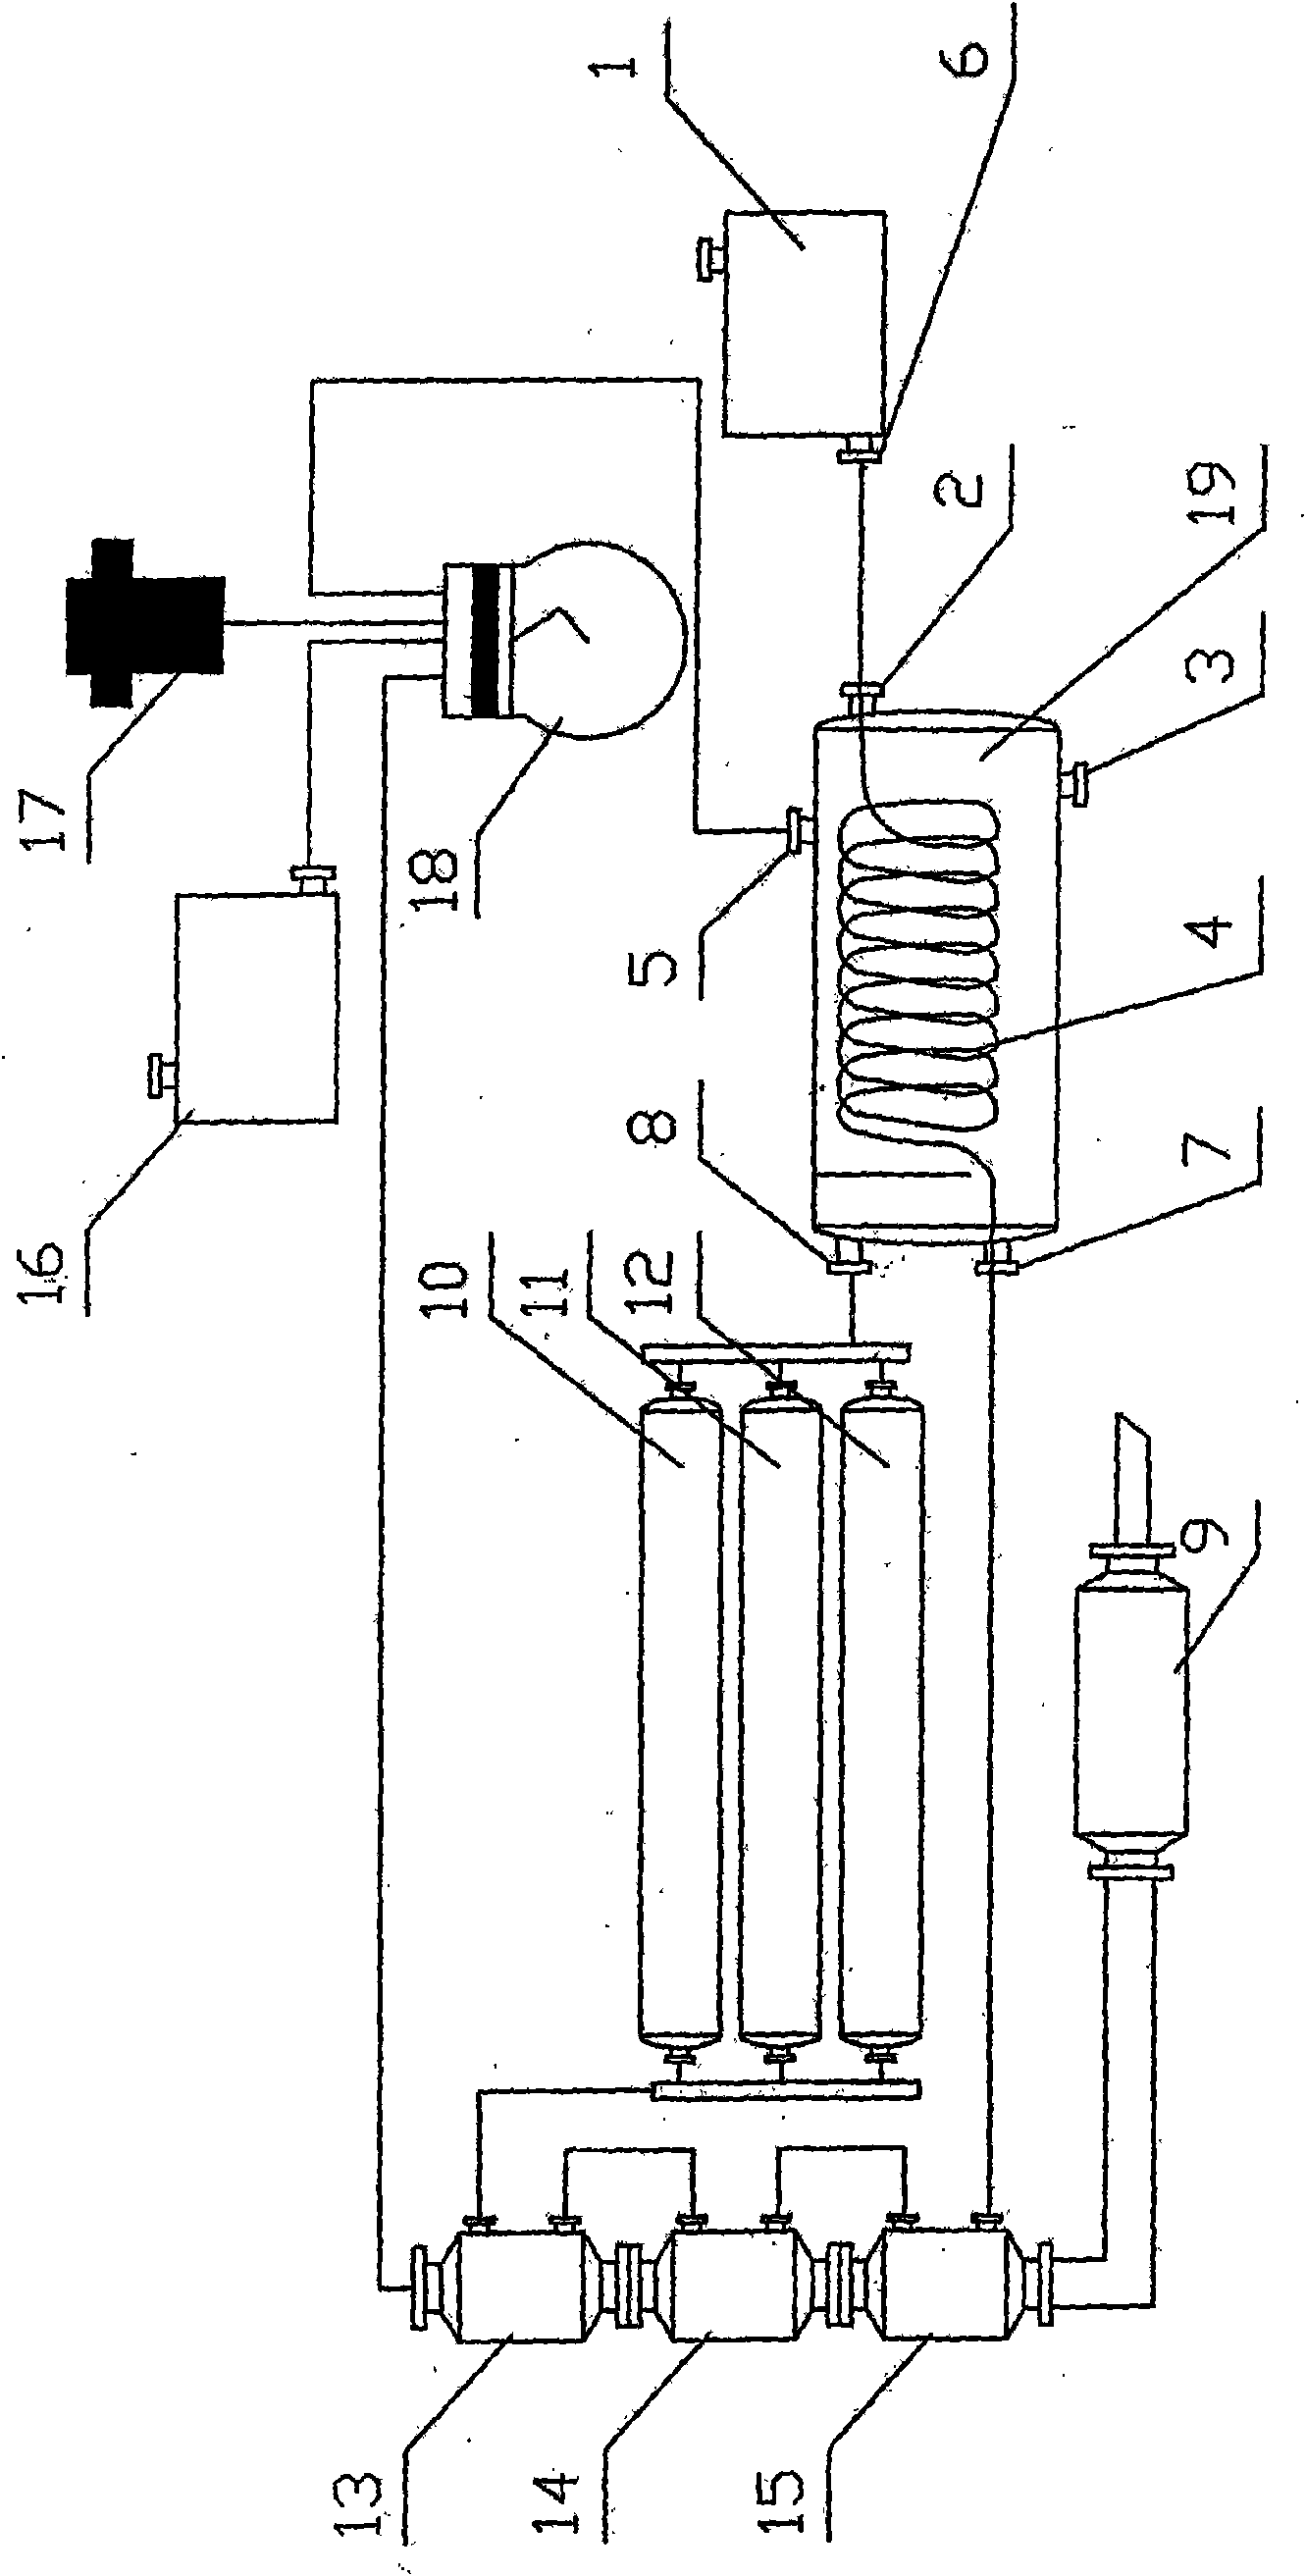 Vehicle-mounted hydrogen production device